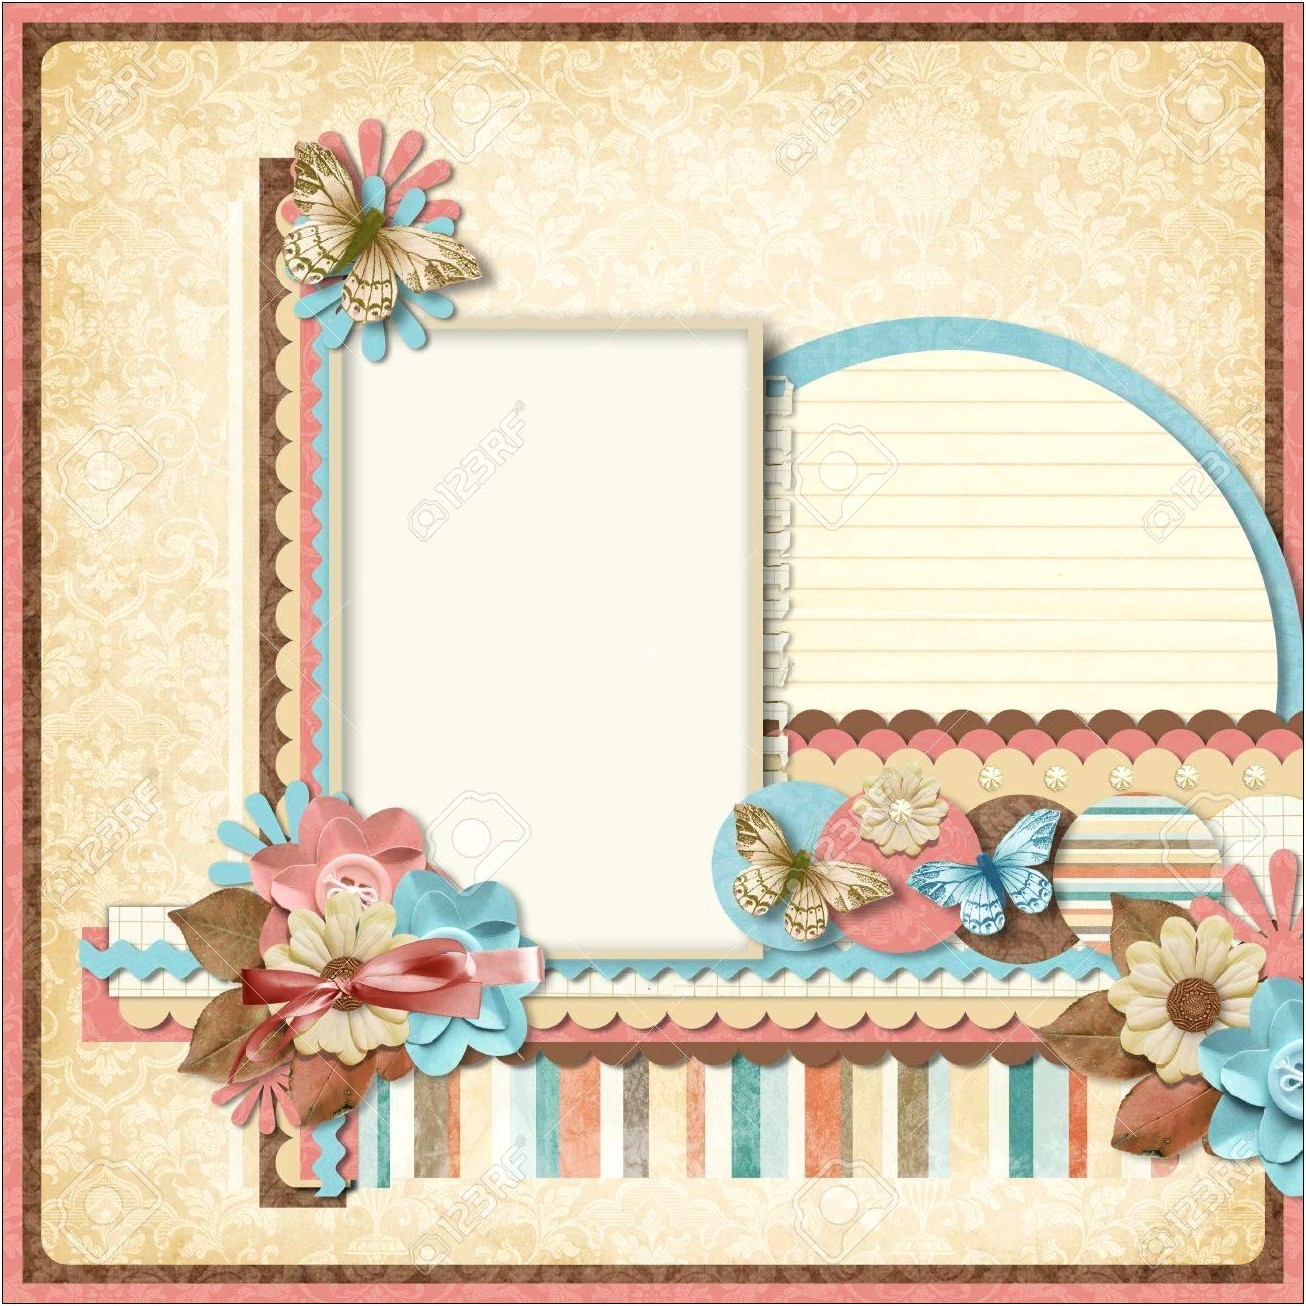 Free Photo Frame Templates For Scrapbooking